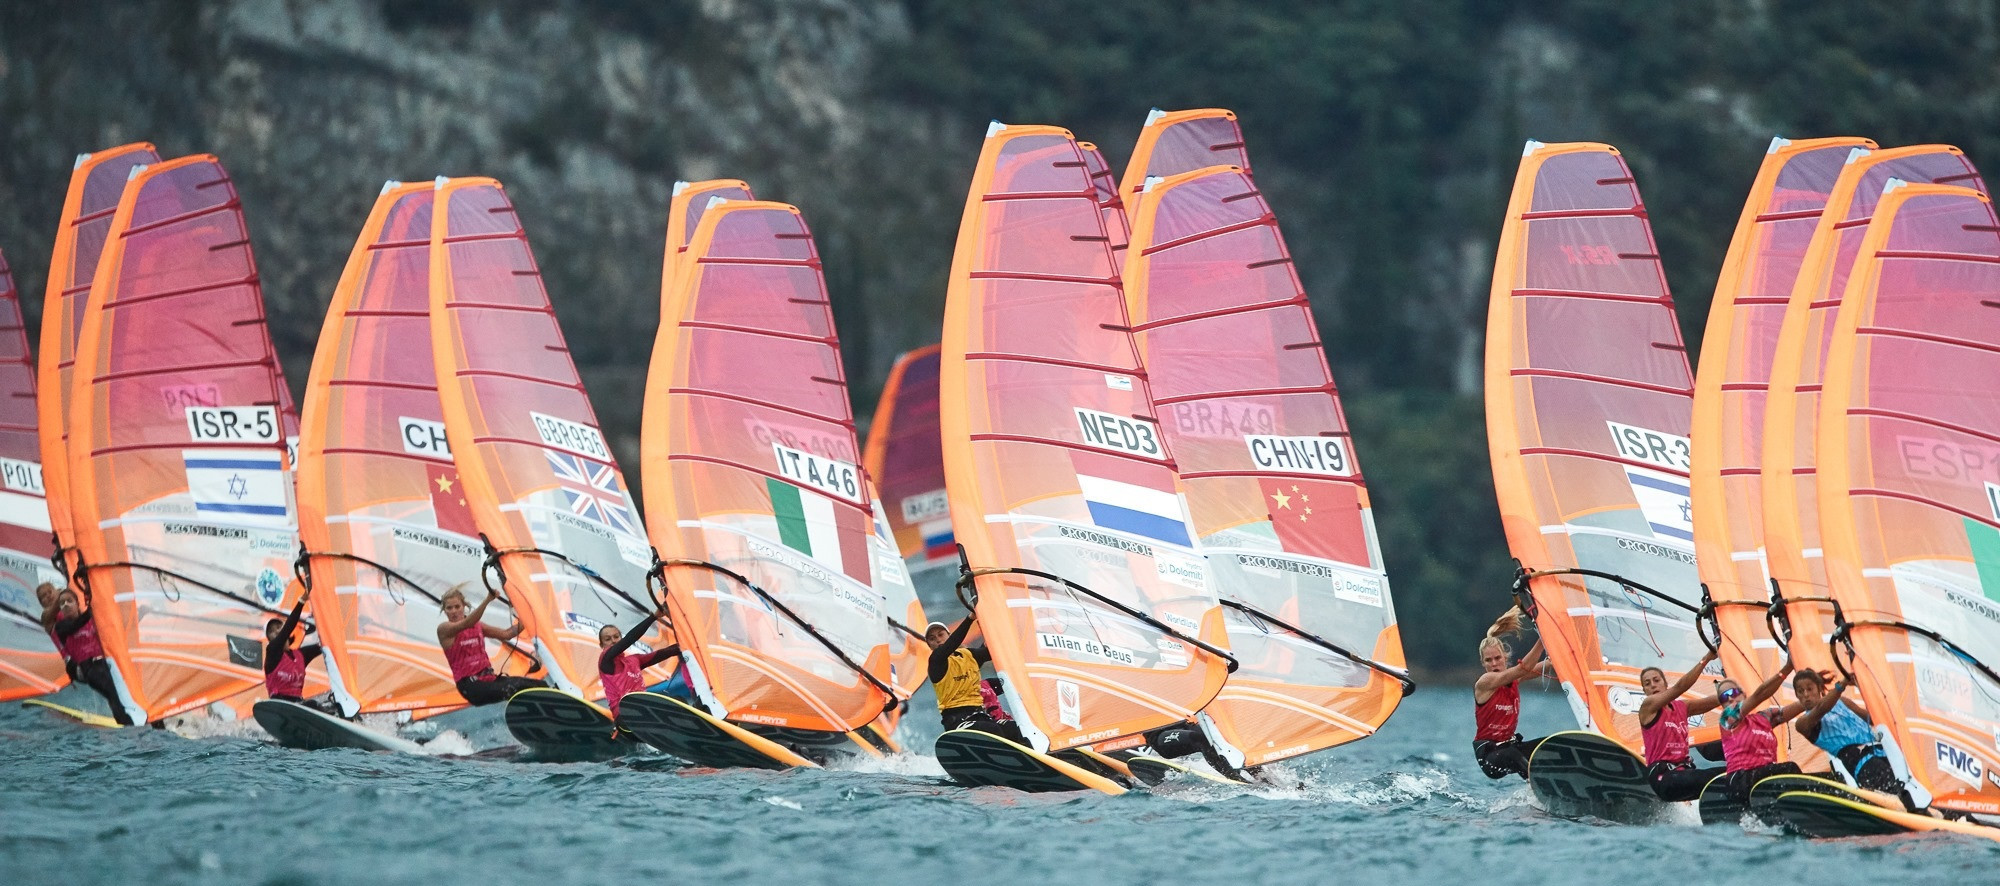 The medal races at the RS:X World Championships take place tomorrow ©RS:X World Championships